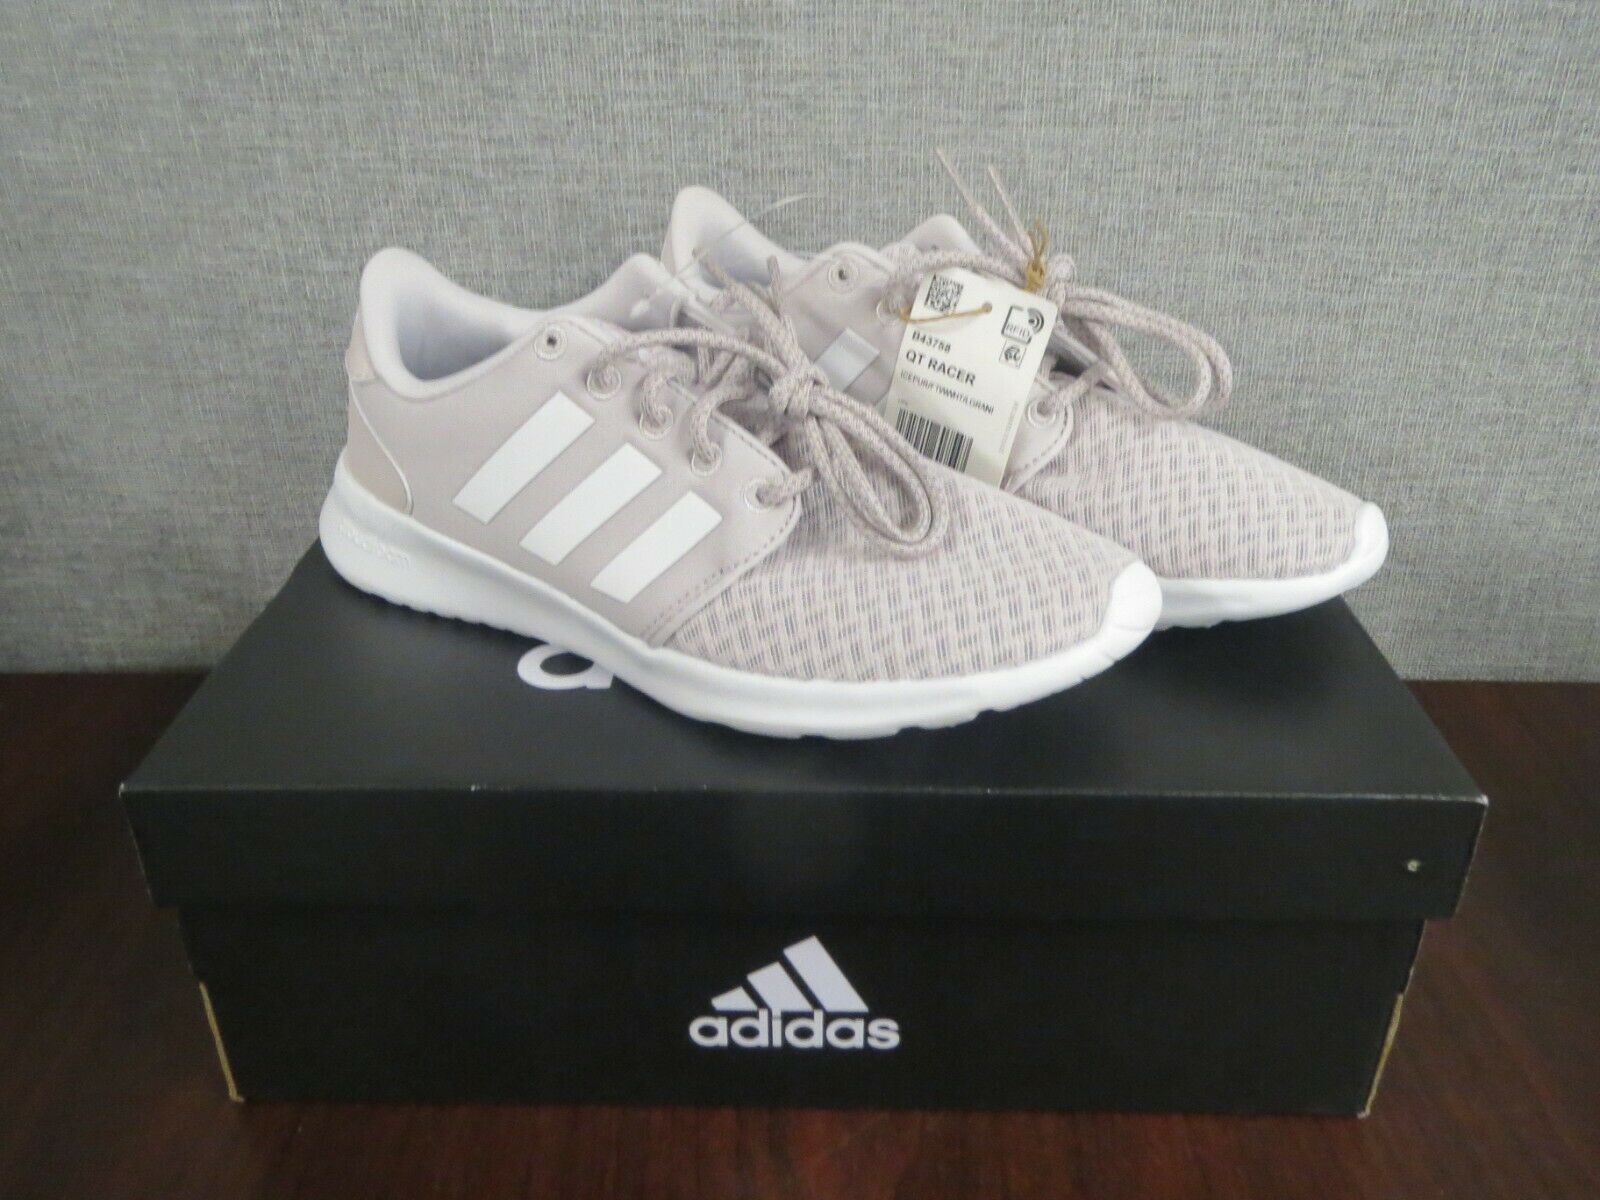 Adidas Women's QT Racer Running Shoe Size 8.5 ~NEW IN BOX W/TAGS~